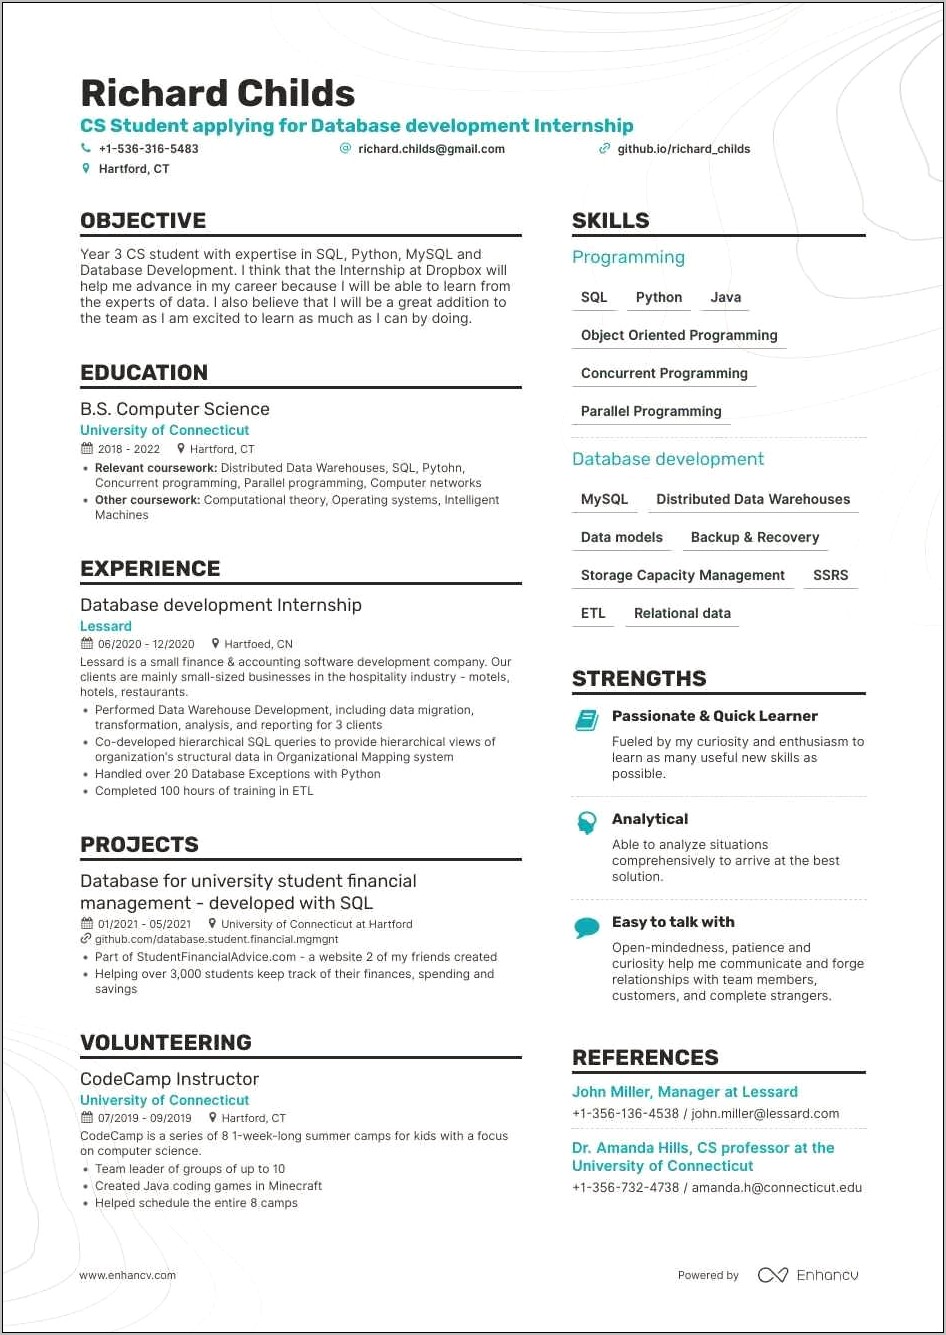 Skills And Abilities Resume For Computer Sciene